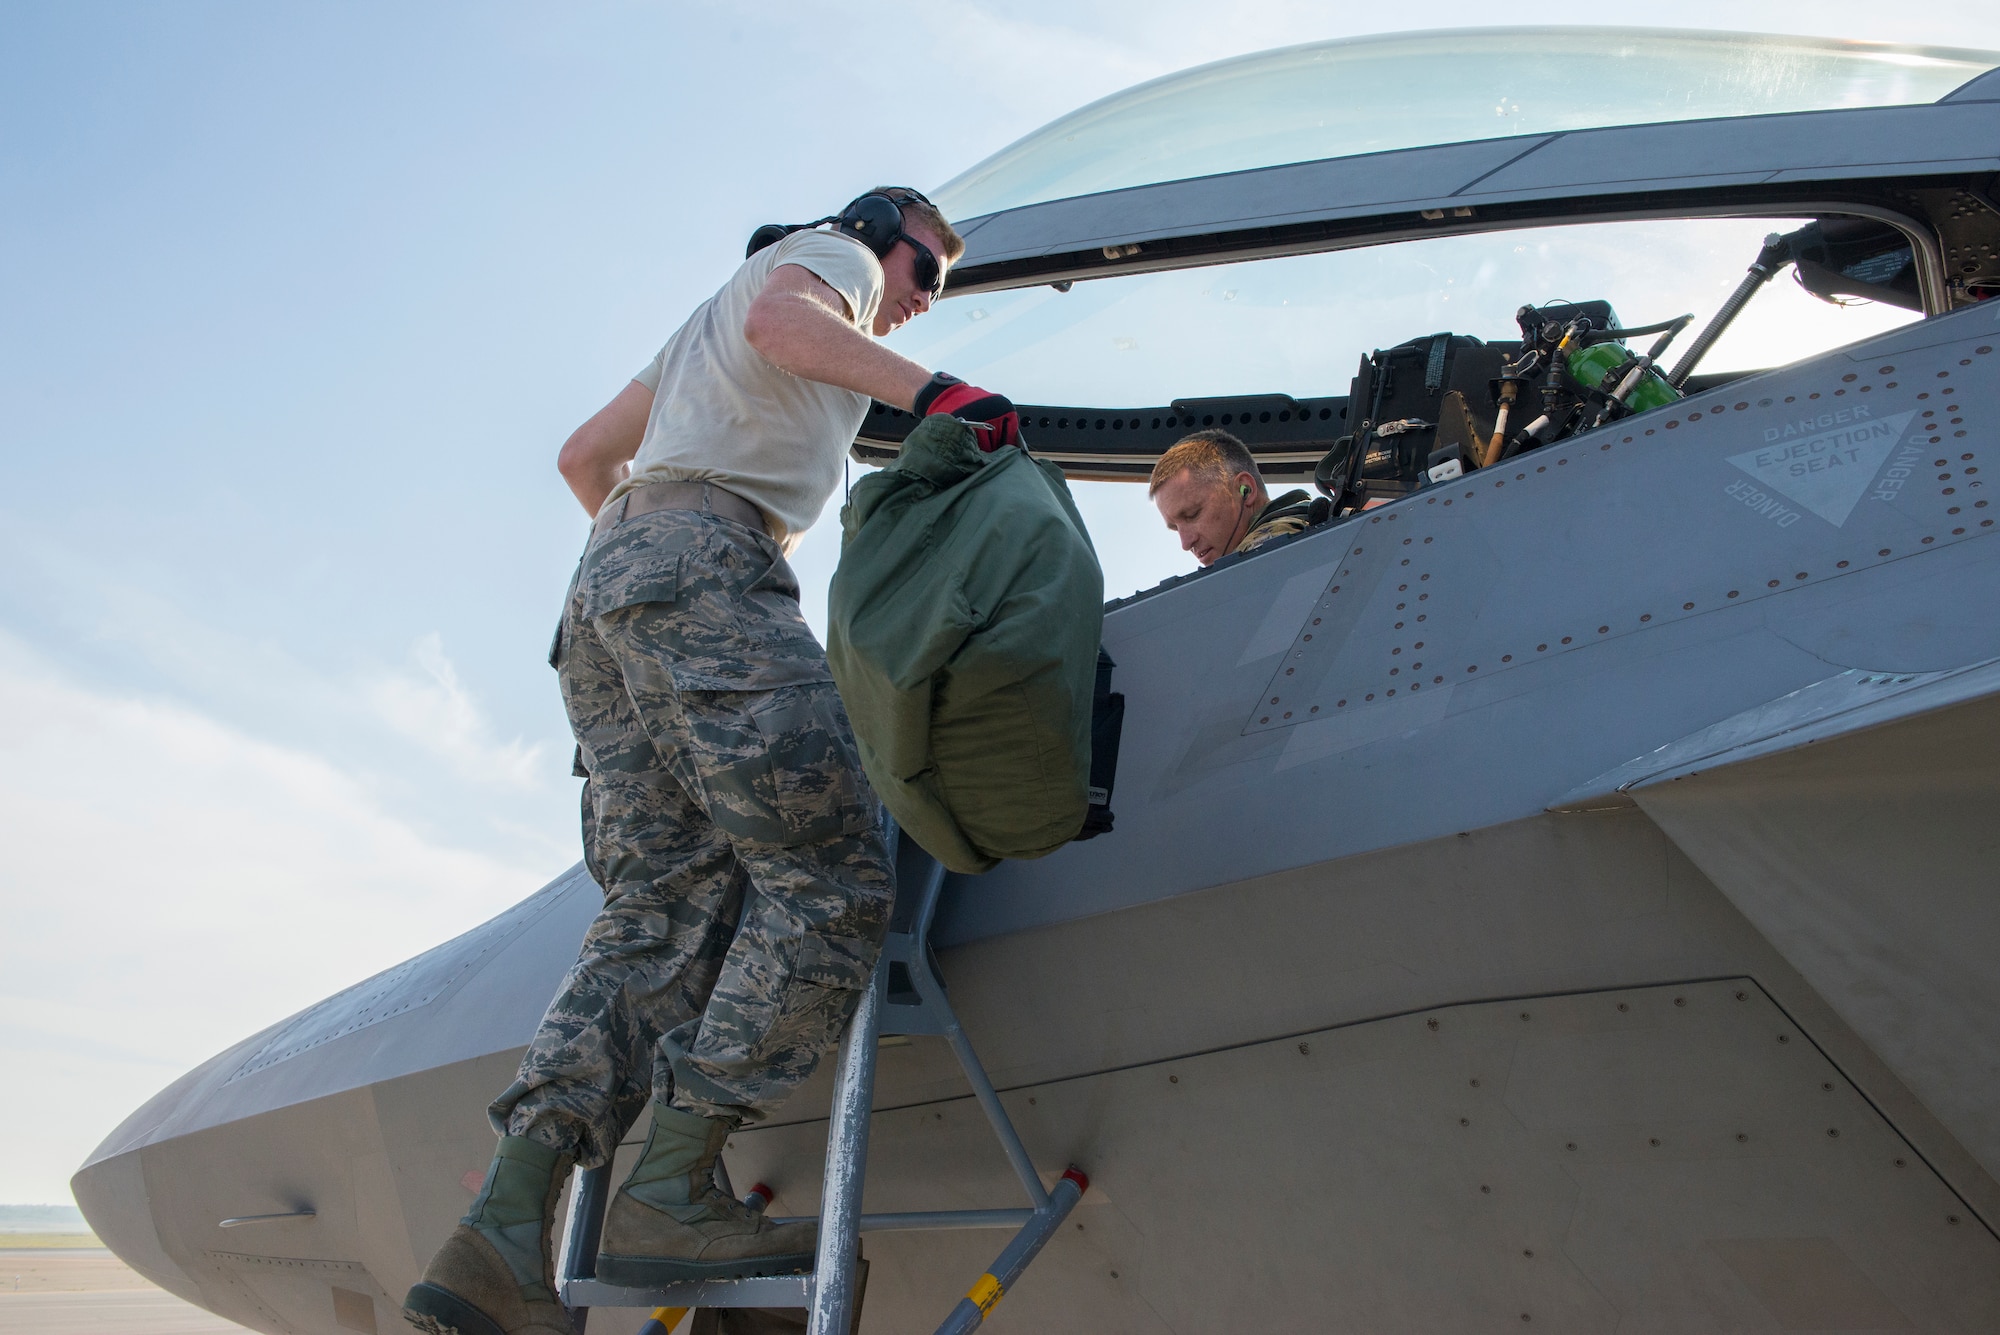 Senior Airman Craig Lively, 94th Aircraft Maintenance Unit Crew Chief, Joint Base Langley-Eustis, hands Col. Pat McAtee, 192nd Fighter Wing Operations Group commander, his flight bag during Exercise Northern Edge 15 at JBER, Alaska, June 16, 2015. Pilots and maintainers from the 192nd Fighter Wing, Virginia Air National Guard and active duty Airmen from the 1st Fighter Wing, Joint Base Langley-Eustis are participating in the two-week training exercise. Northern Edge 2015 is Alaska’s premier joint training exercise designed to perfect mission operations, techniques and procedures as well as enhance interoperability across all military services, Reserves and Air National Guard forces. (U.S. Air Force photo by Staff Sgt. Jonathan Garcia/Released)